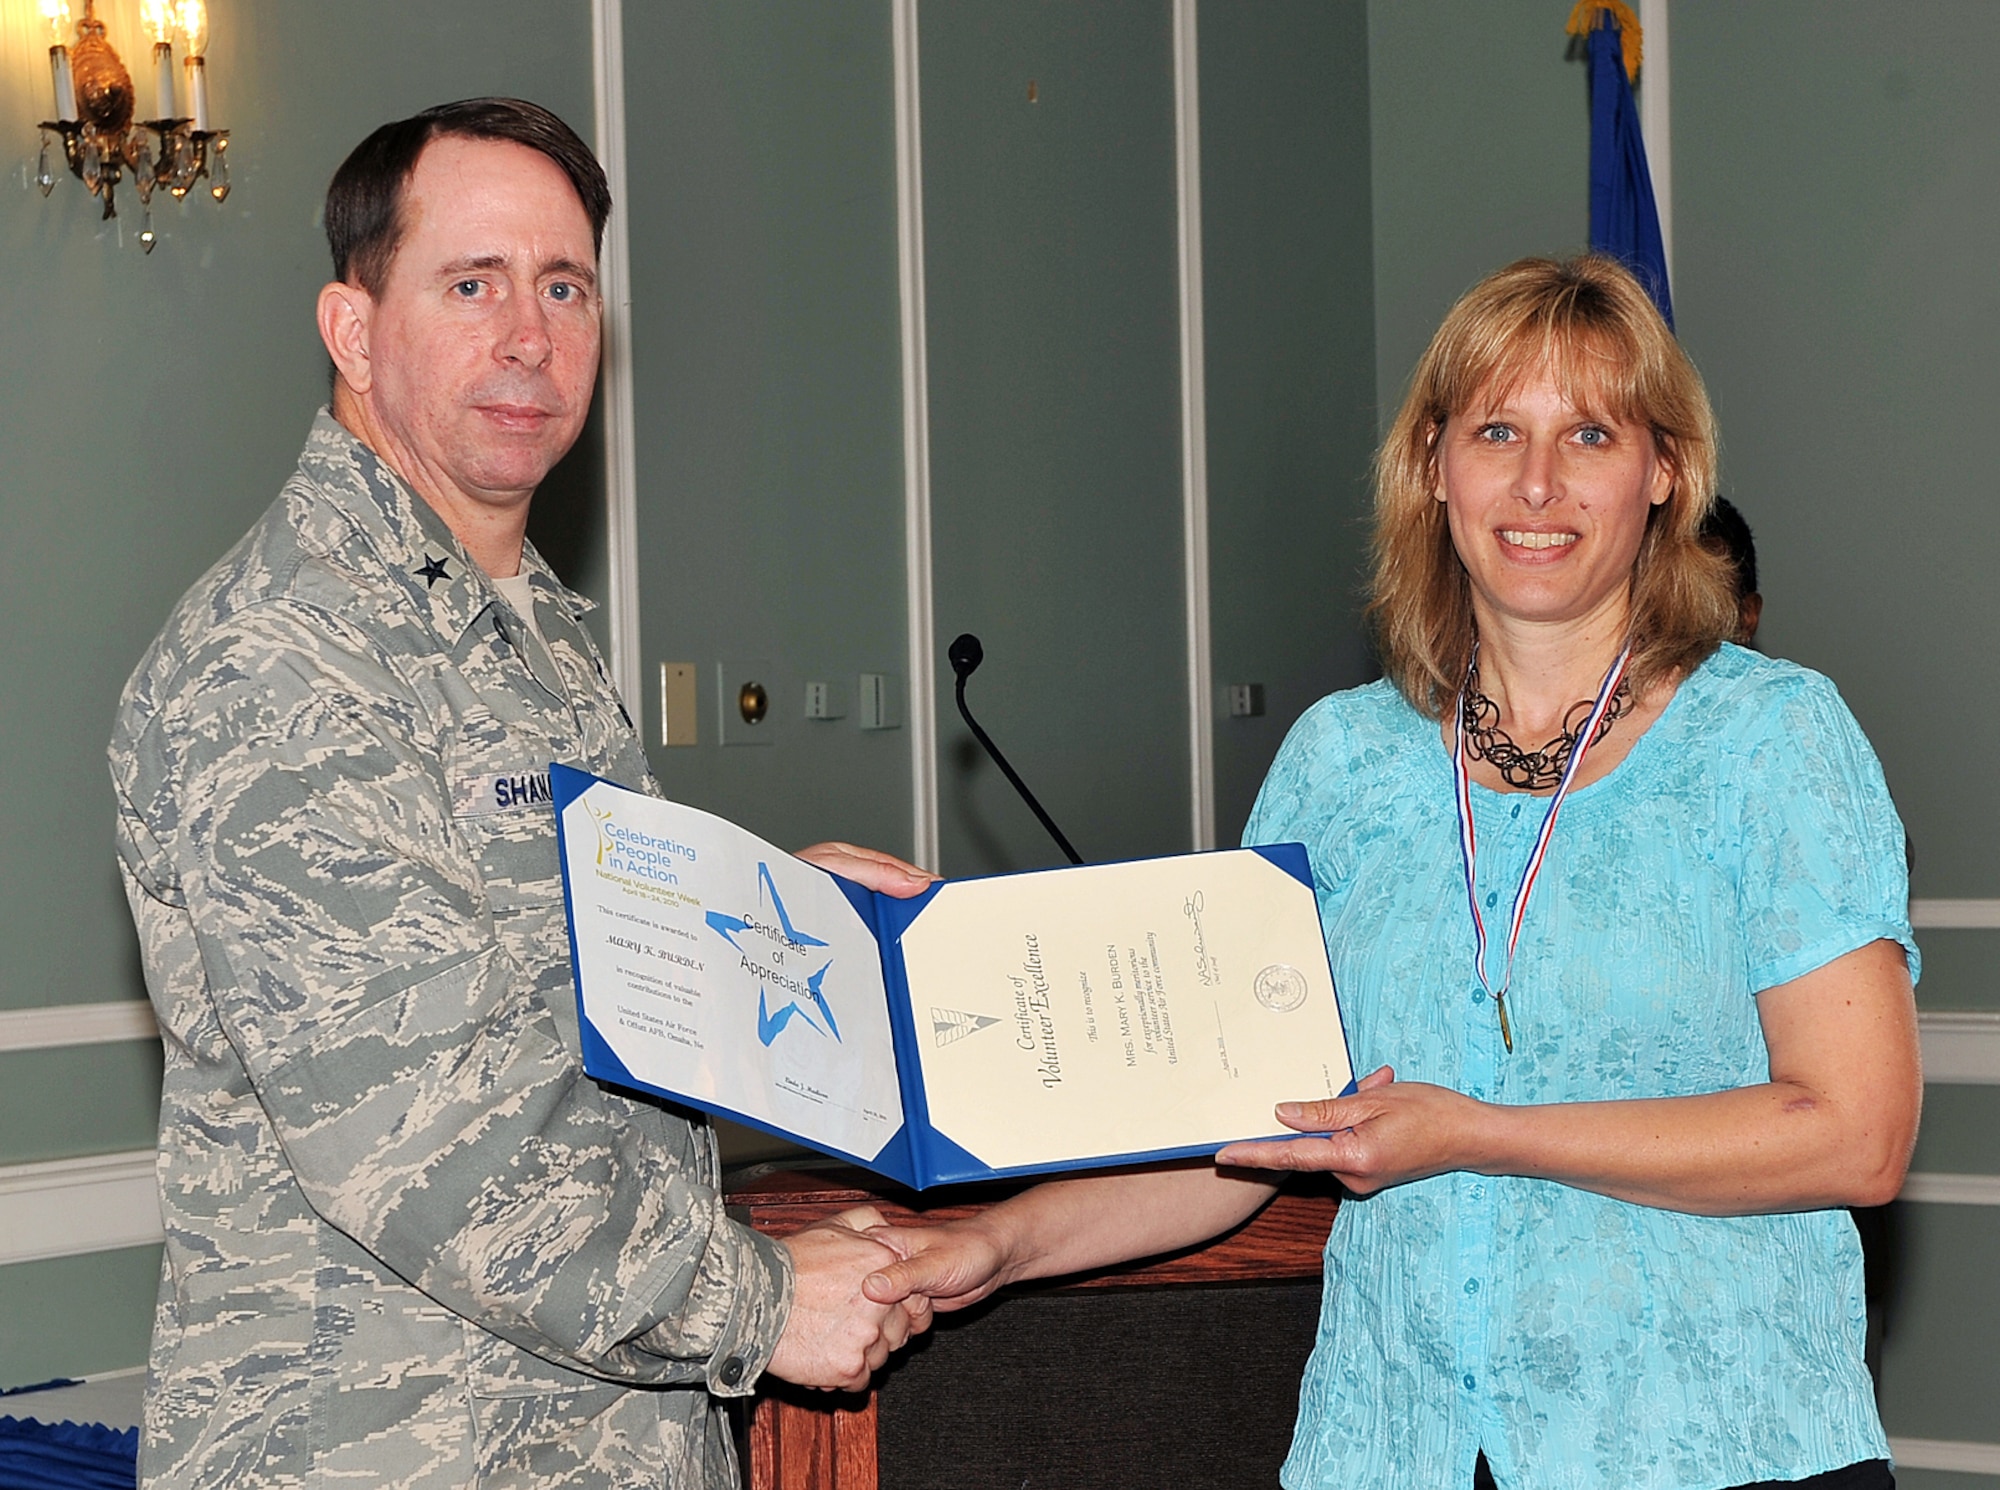 OFFUTT AIR FORCE BASE, Neb. -- Brig. Gen. John N.T. Shanahan, 55th Wing commander, presents the Volunteer Excellence Award to Mary Burden, an account manager for the 55th WG Chapel, during the Volunteer Appreciation Reception at the Patriot Club here April 28. More than 80 people from various organizations on and off-base attended the event to honor the contributions of Offutt's many volunteers. Mrs. Burden, the spouse of Master Sgt. Ken D. Burden, crew chief section chief with the 55th Maintenance Group, volunteered more than 380 hours in 2009 to support the chapel in a number of ways. U.S. Air Force photo by Charles Haymond